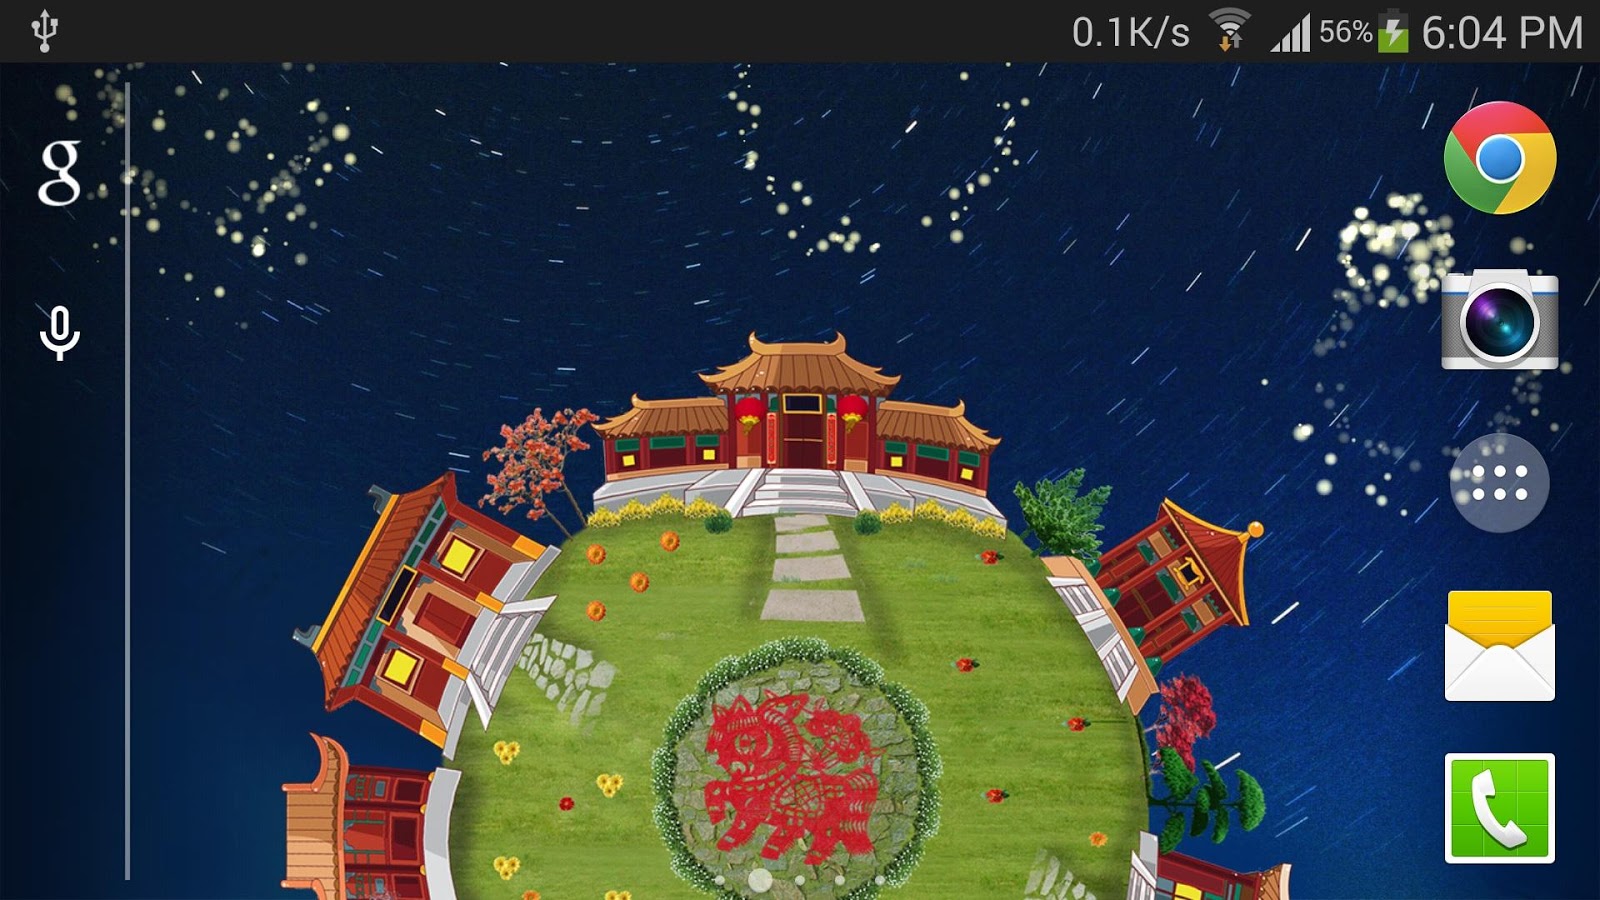 Rotating Year Live Wallpaper Android Apps On Google Play